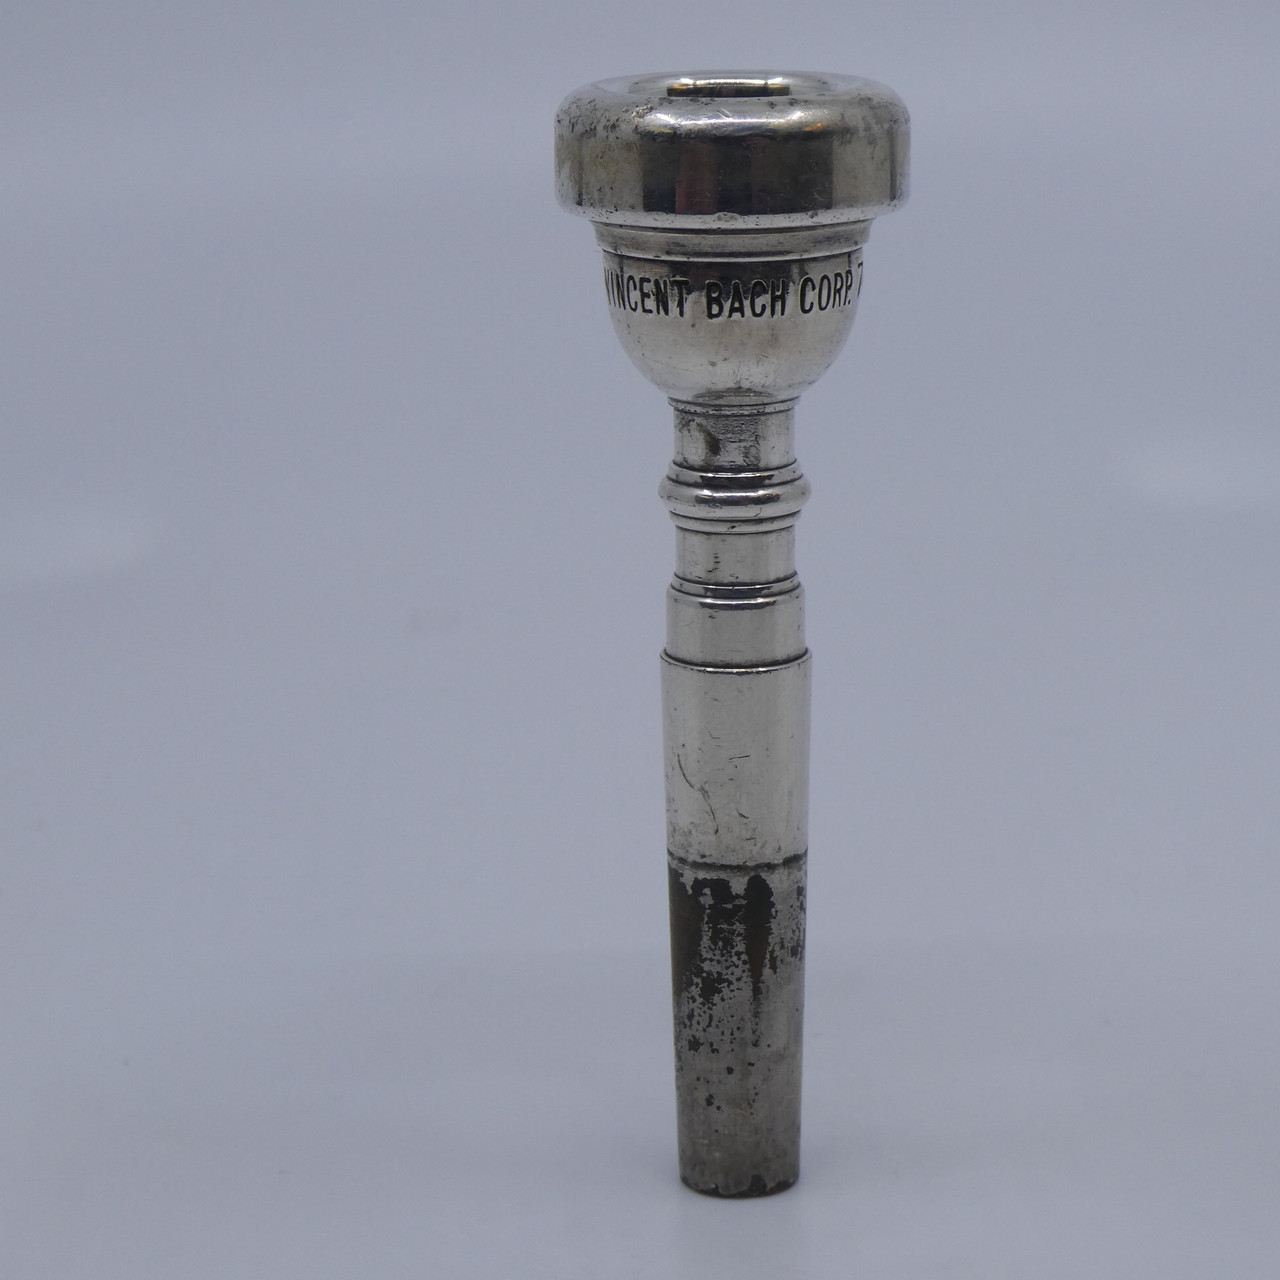 Pre-owned Vincent Bach Corp. 7C mouthpiece in Silver Plate lot280-294,  lot371